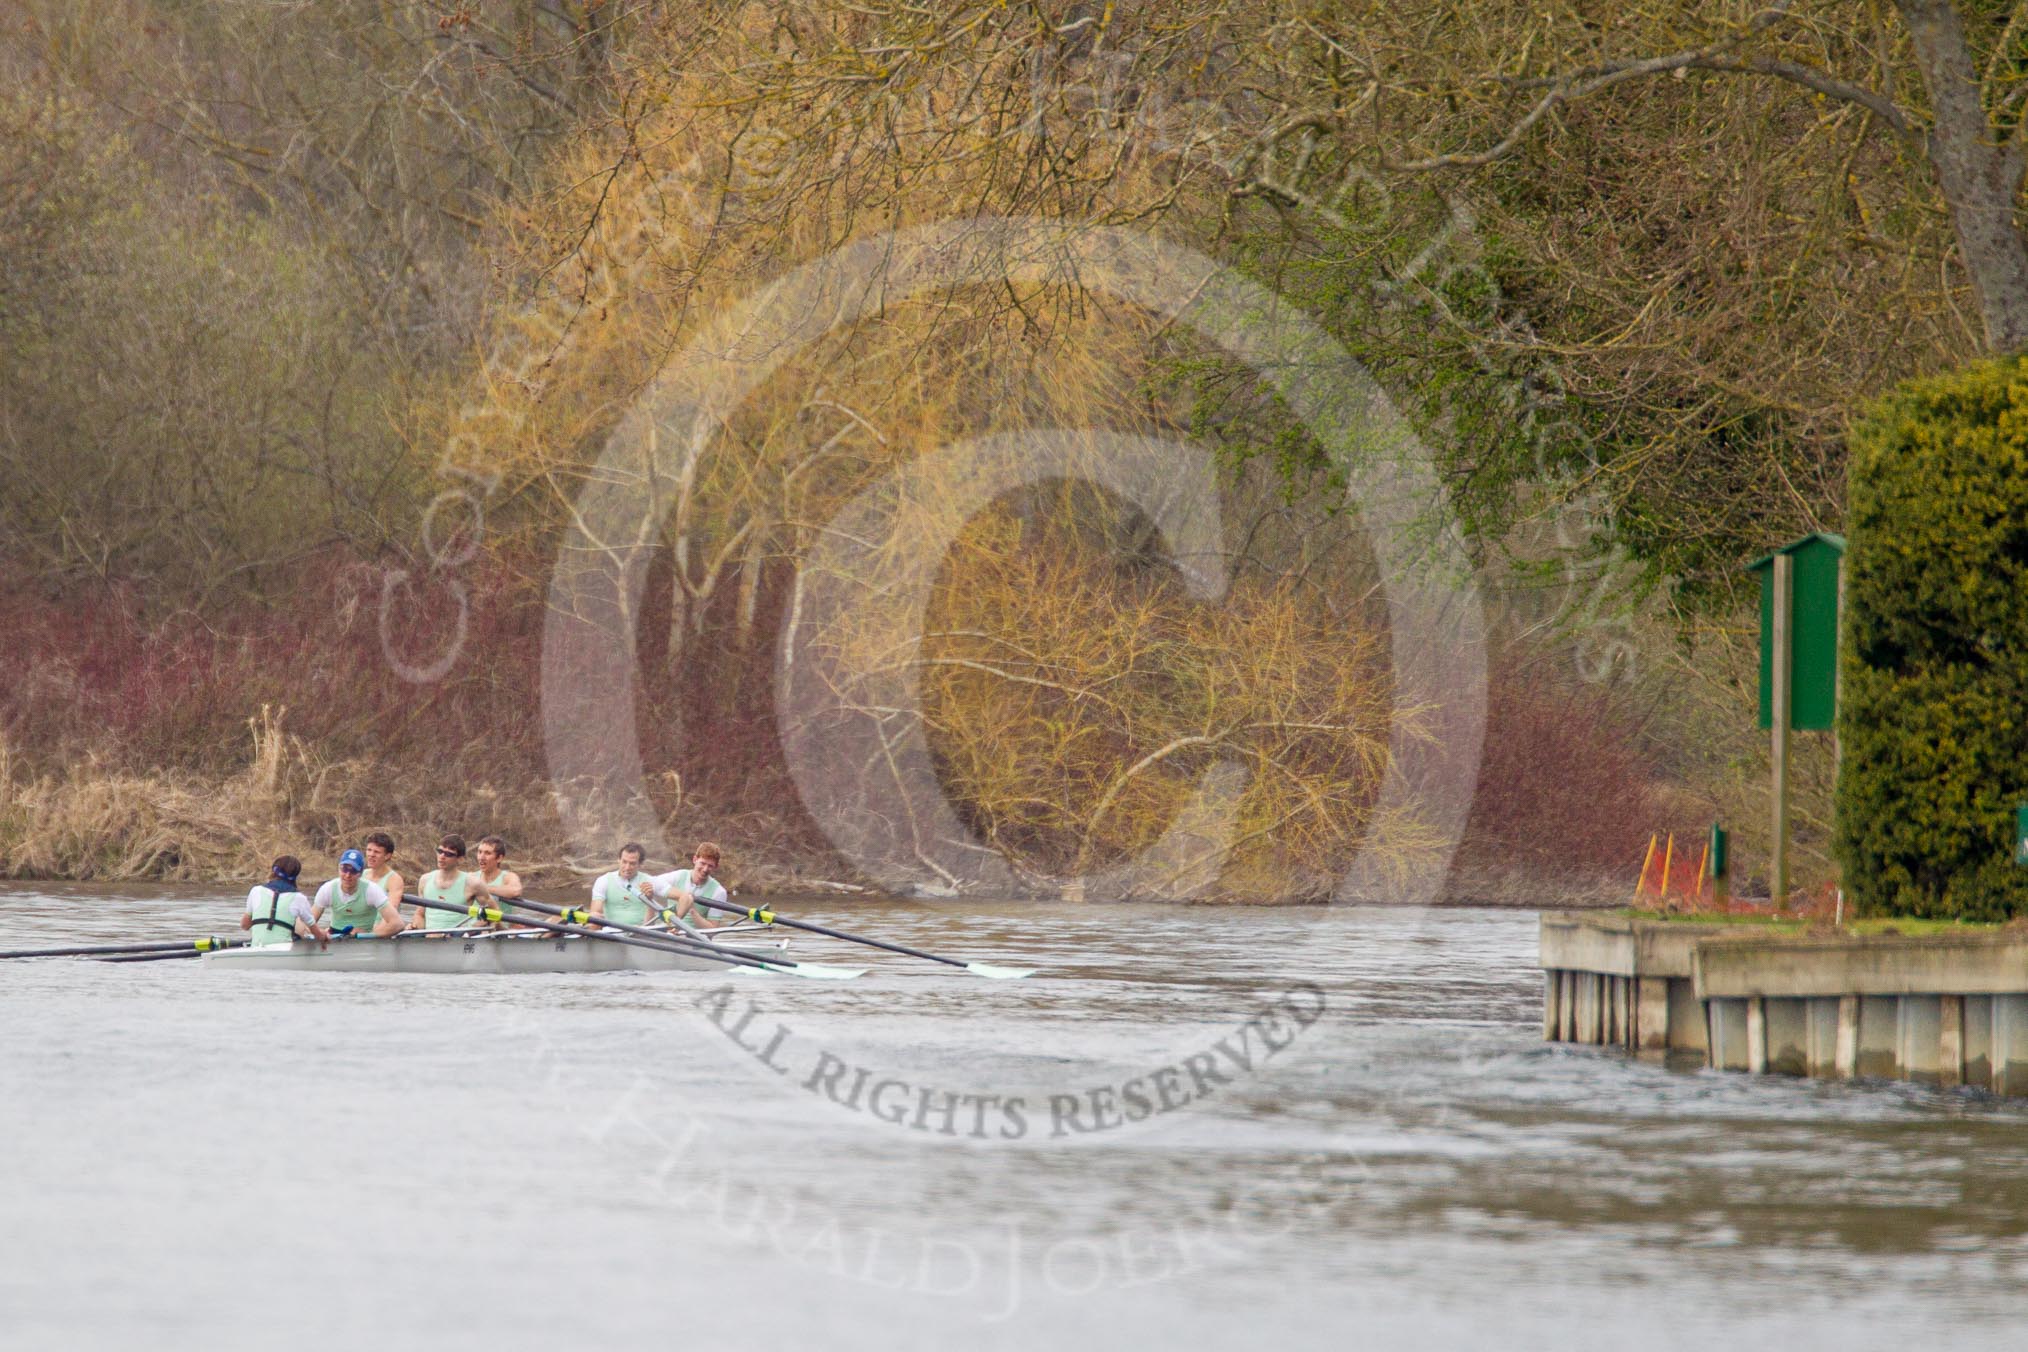 The Women's Boat Race and Henley Boat Races 2014: The Lightweight Men's Boat Race - OULRC vs CULRC. Cambridge has won the race..
River Thames,
Henley-on-Thames,
Buckinghamshire,
United Kingdom,
on 30 March 2014 at 15:42, image #405